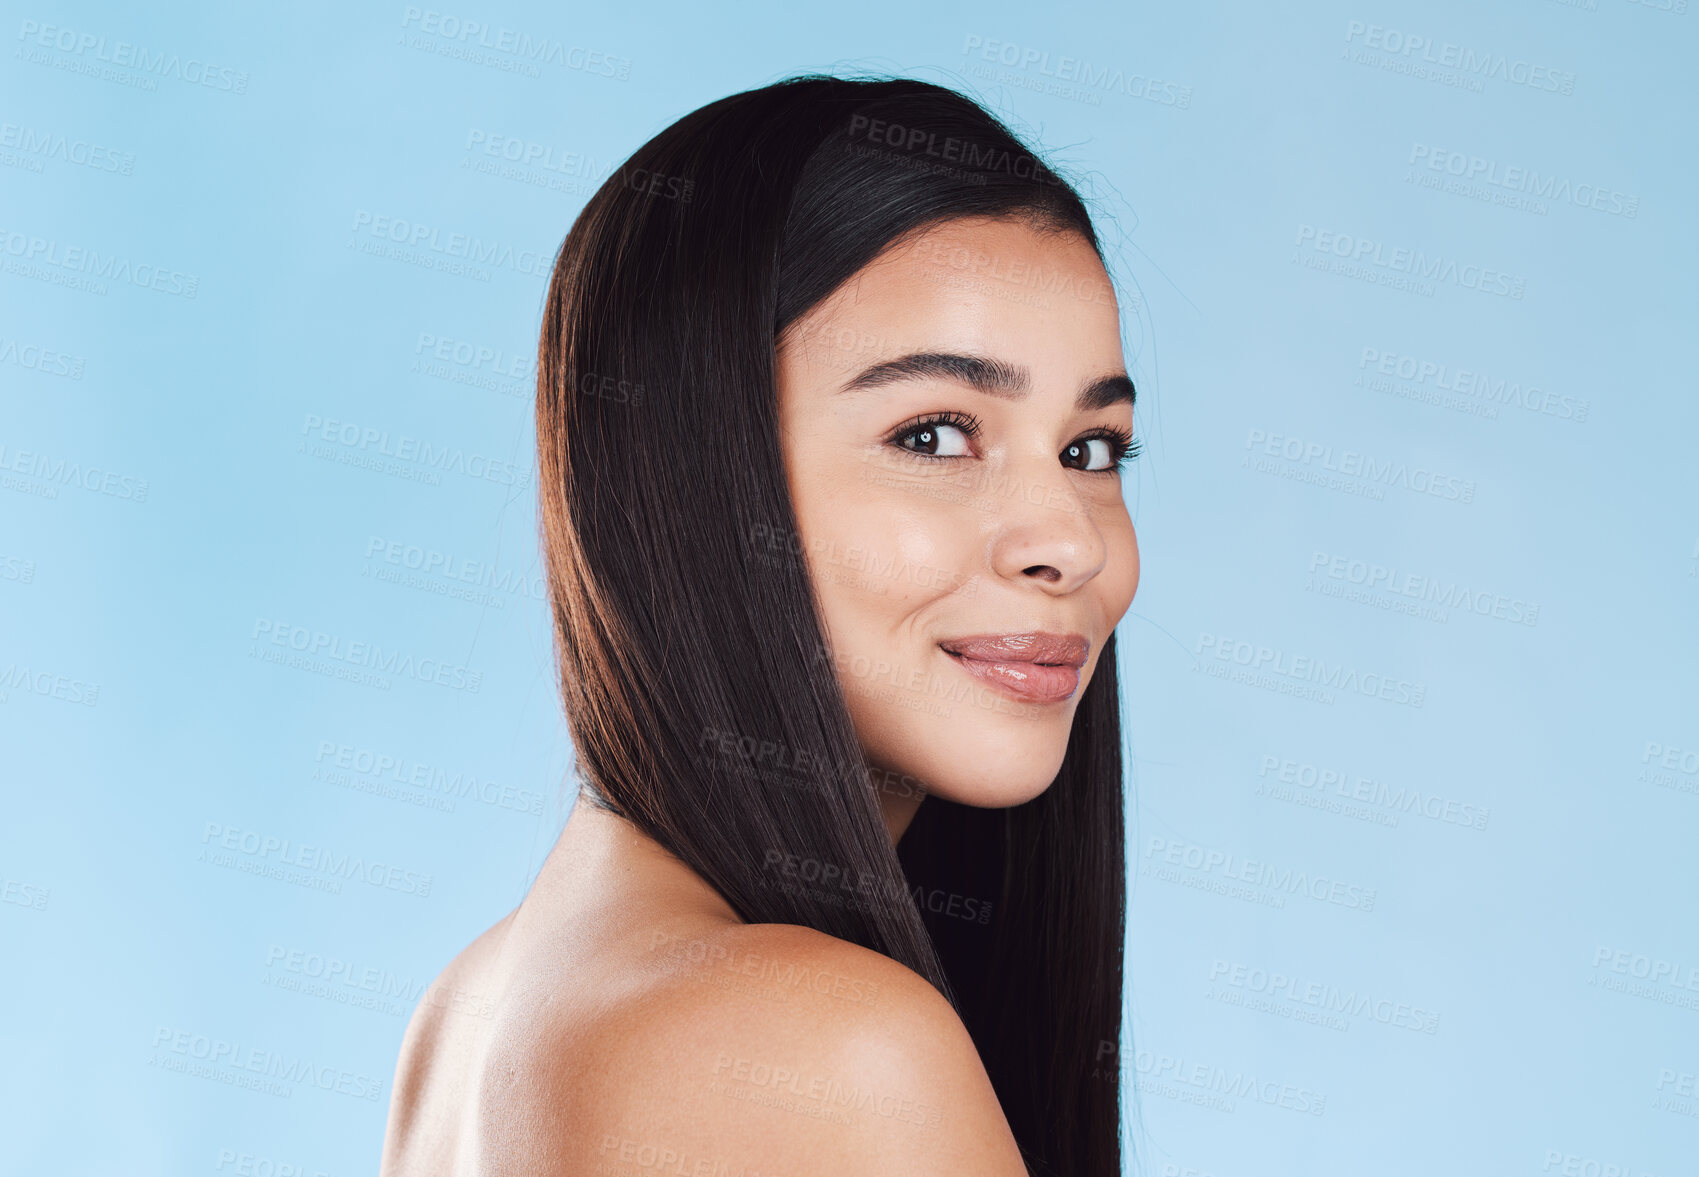 Buy stock photo Portrait of one beautiful young hispanic woman with healthy skin and sleek hair smiling against a blue studio background. Happy mixed race model with flawless complexion and natural beauty